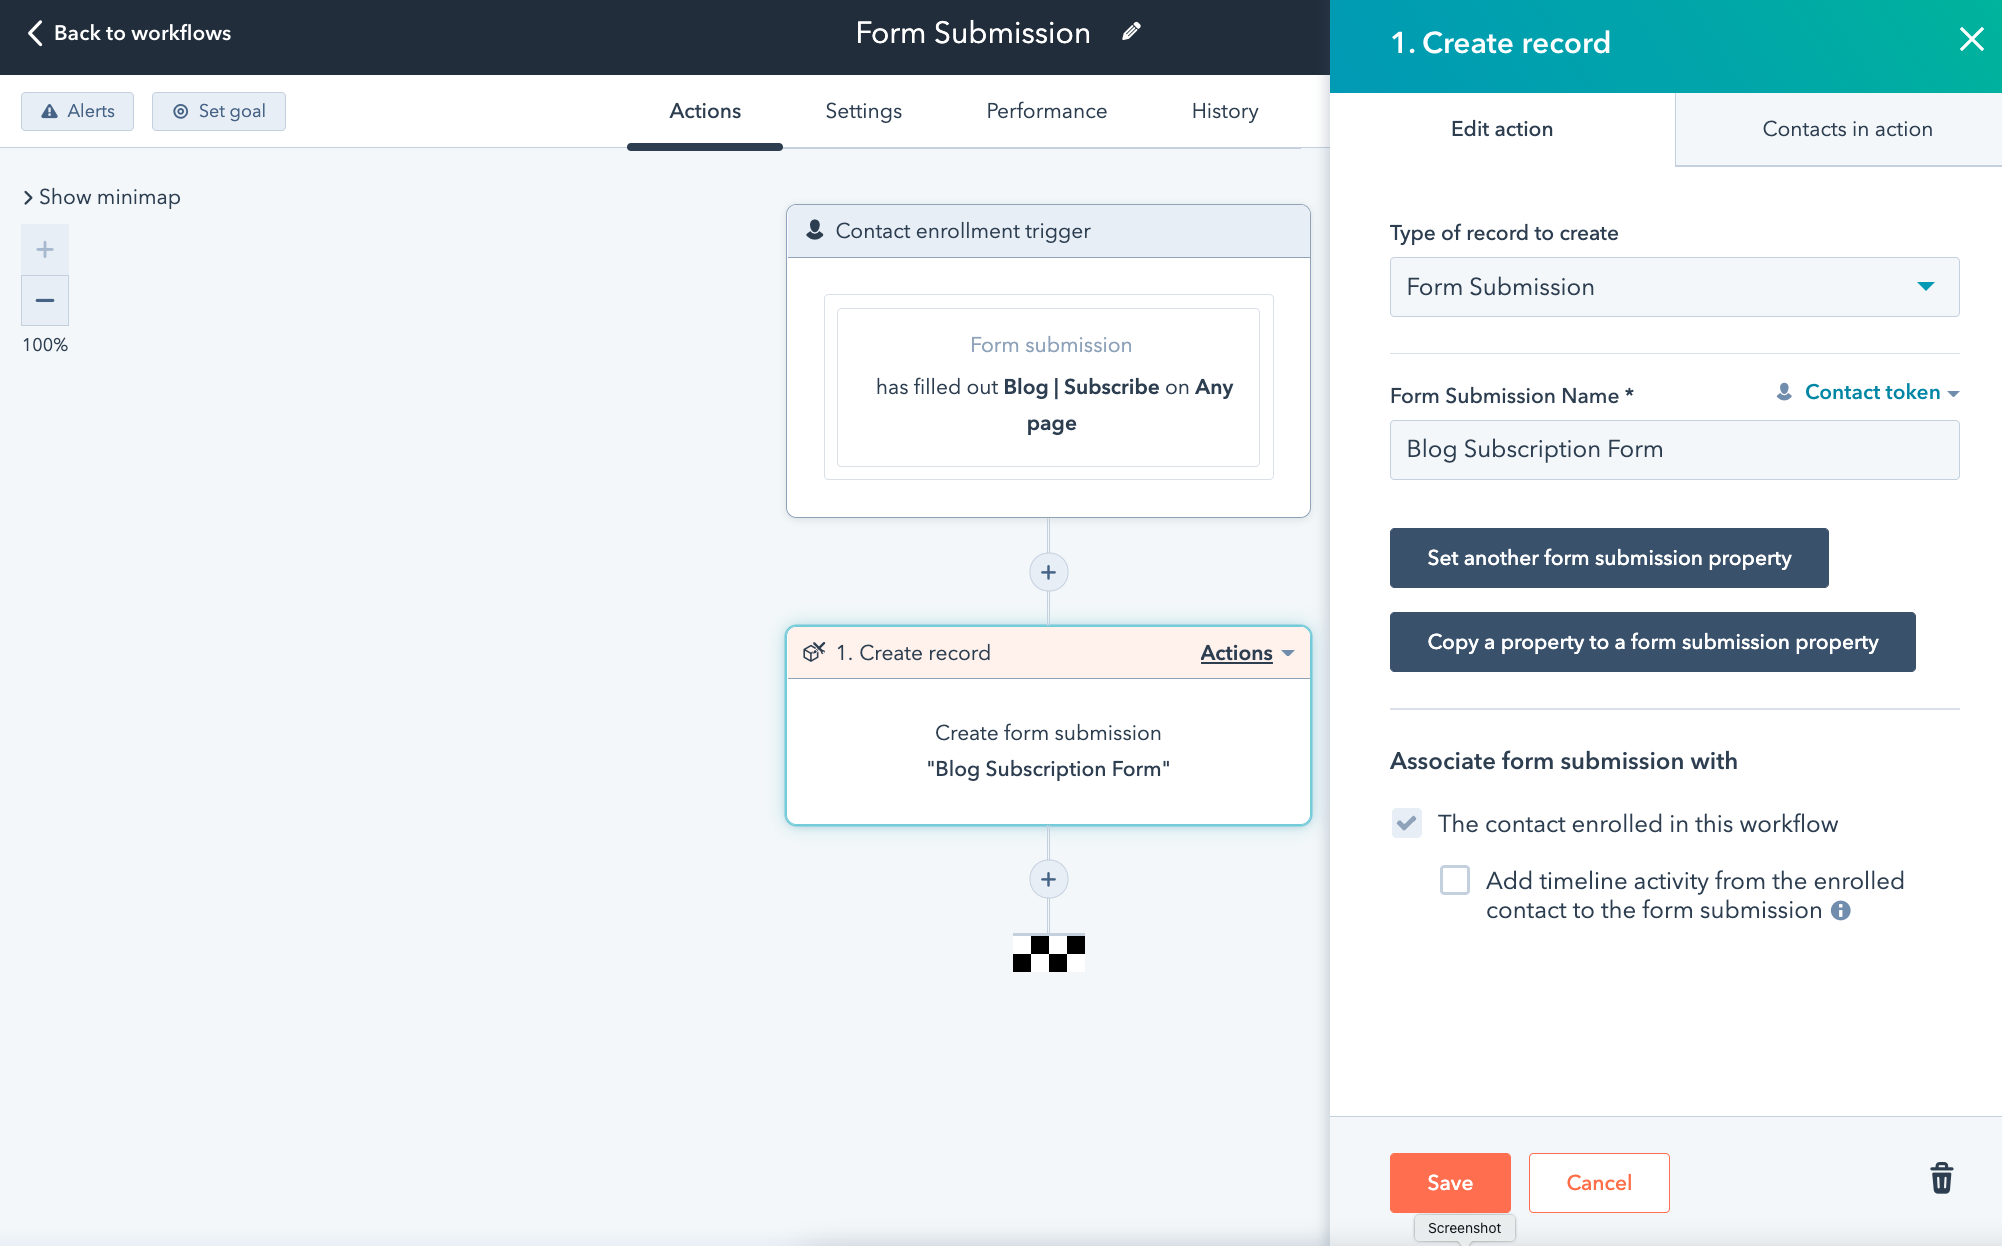 How to report on form submissions in HubSpot